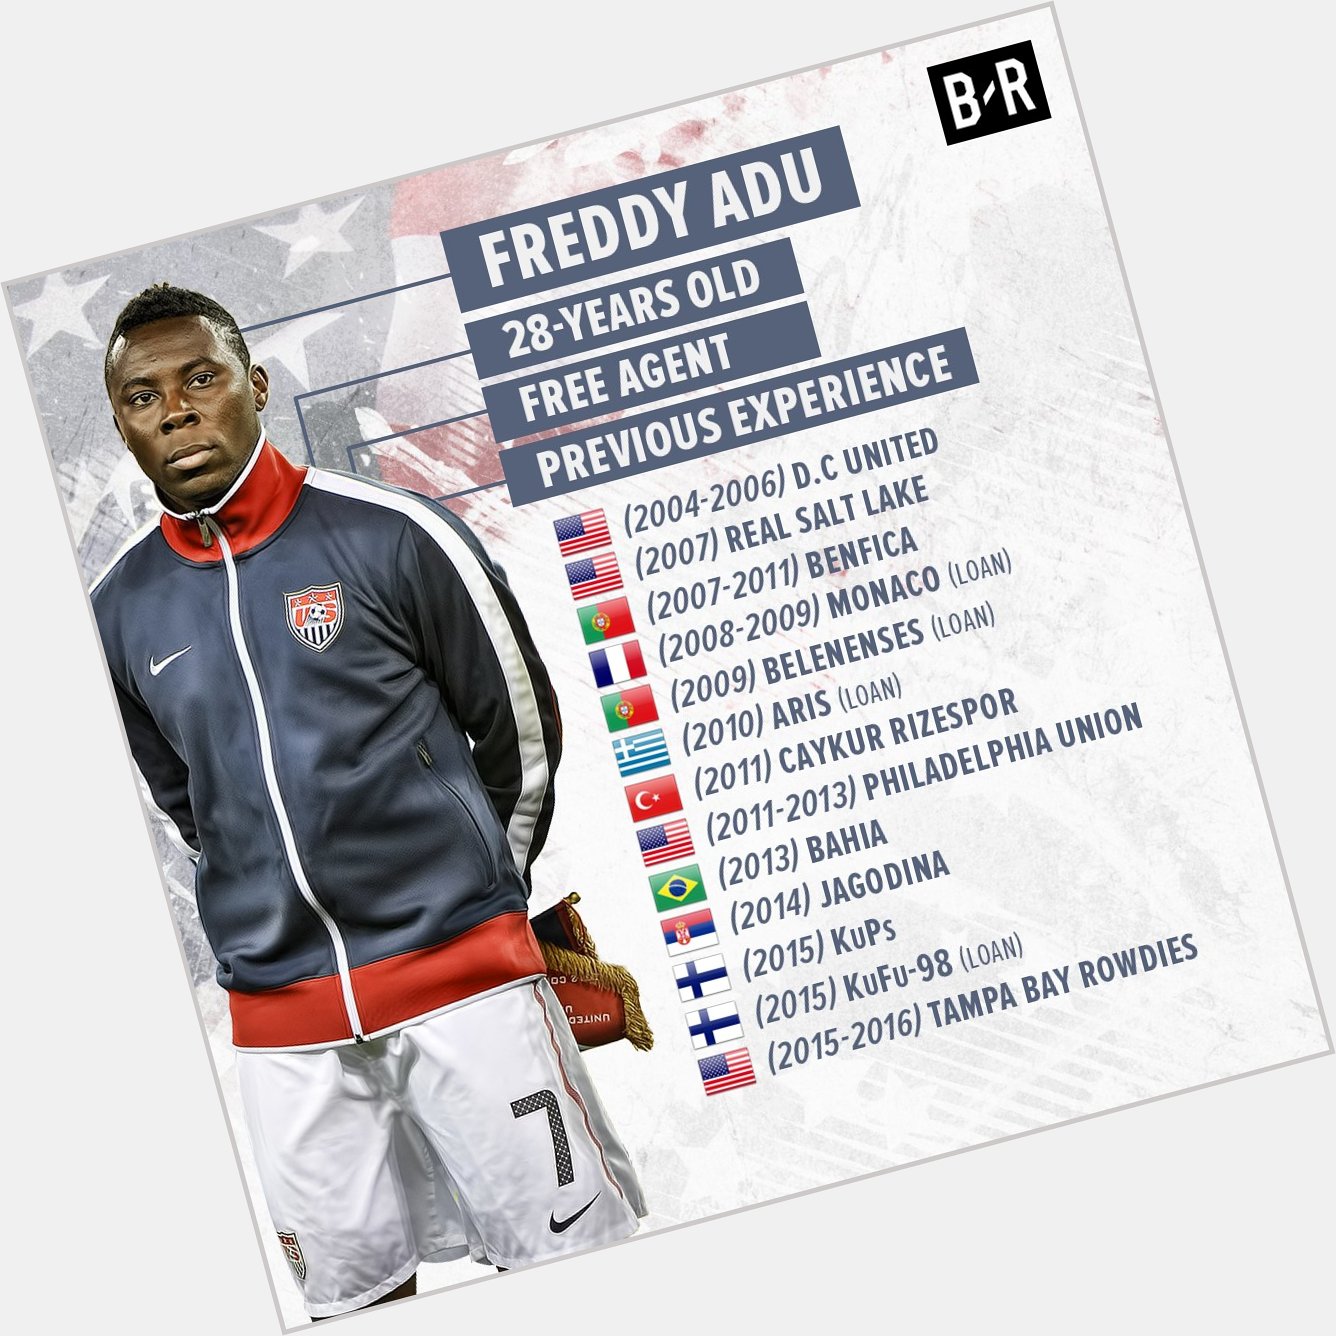 Happy 28th birthday, Freddy Adu the American football prodigy who never quite hit the heights 